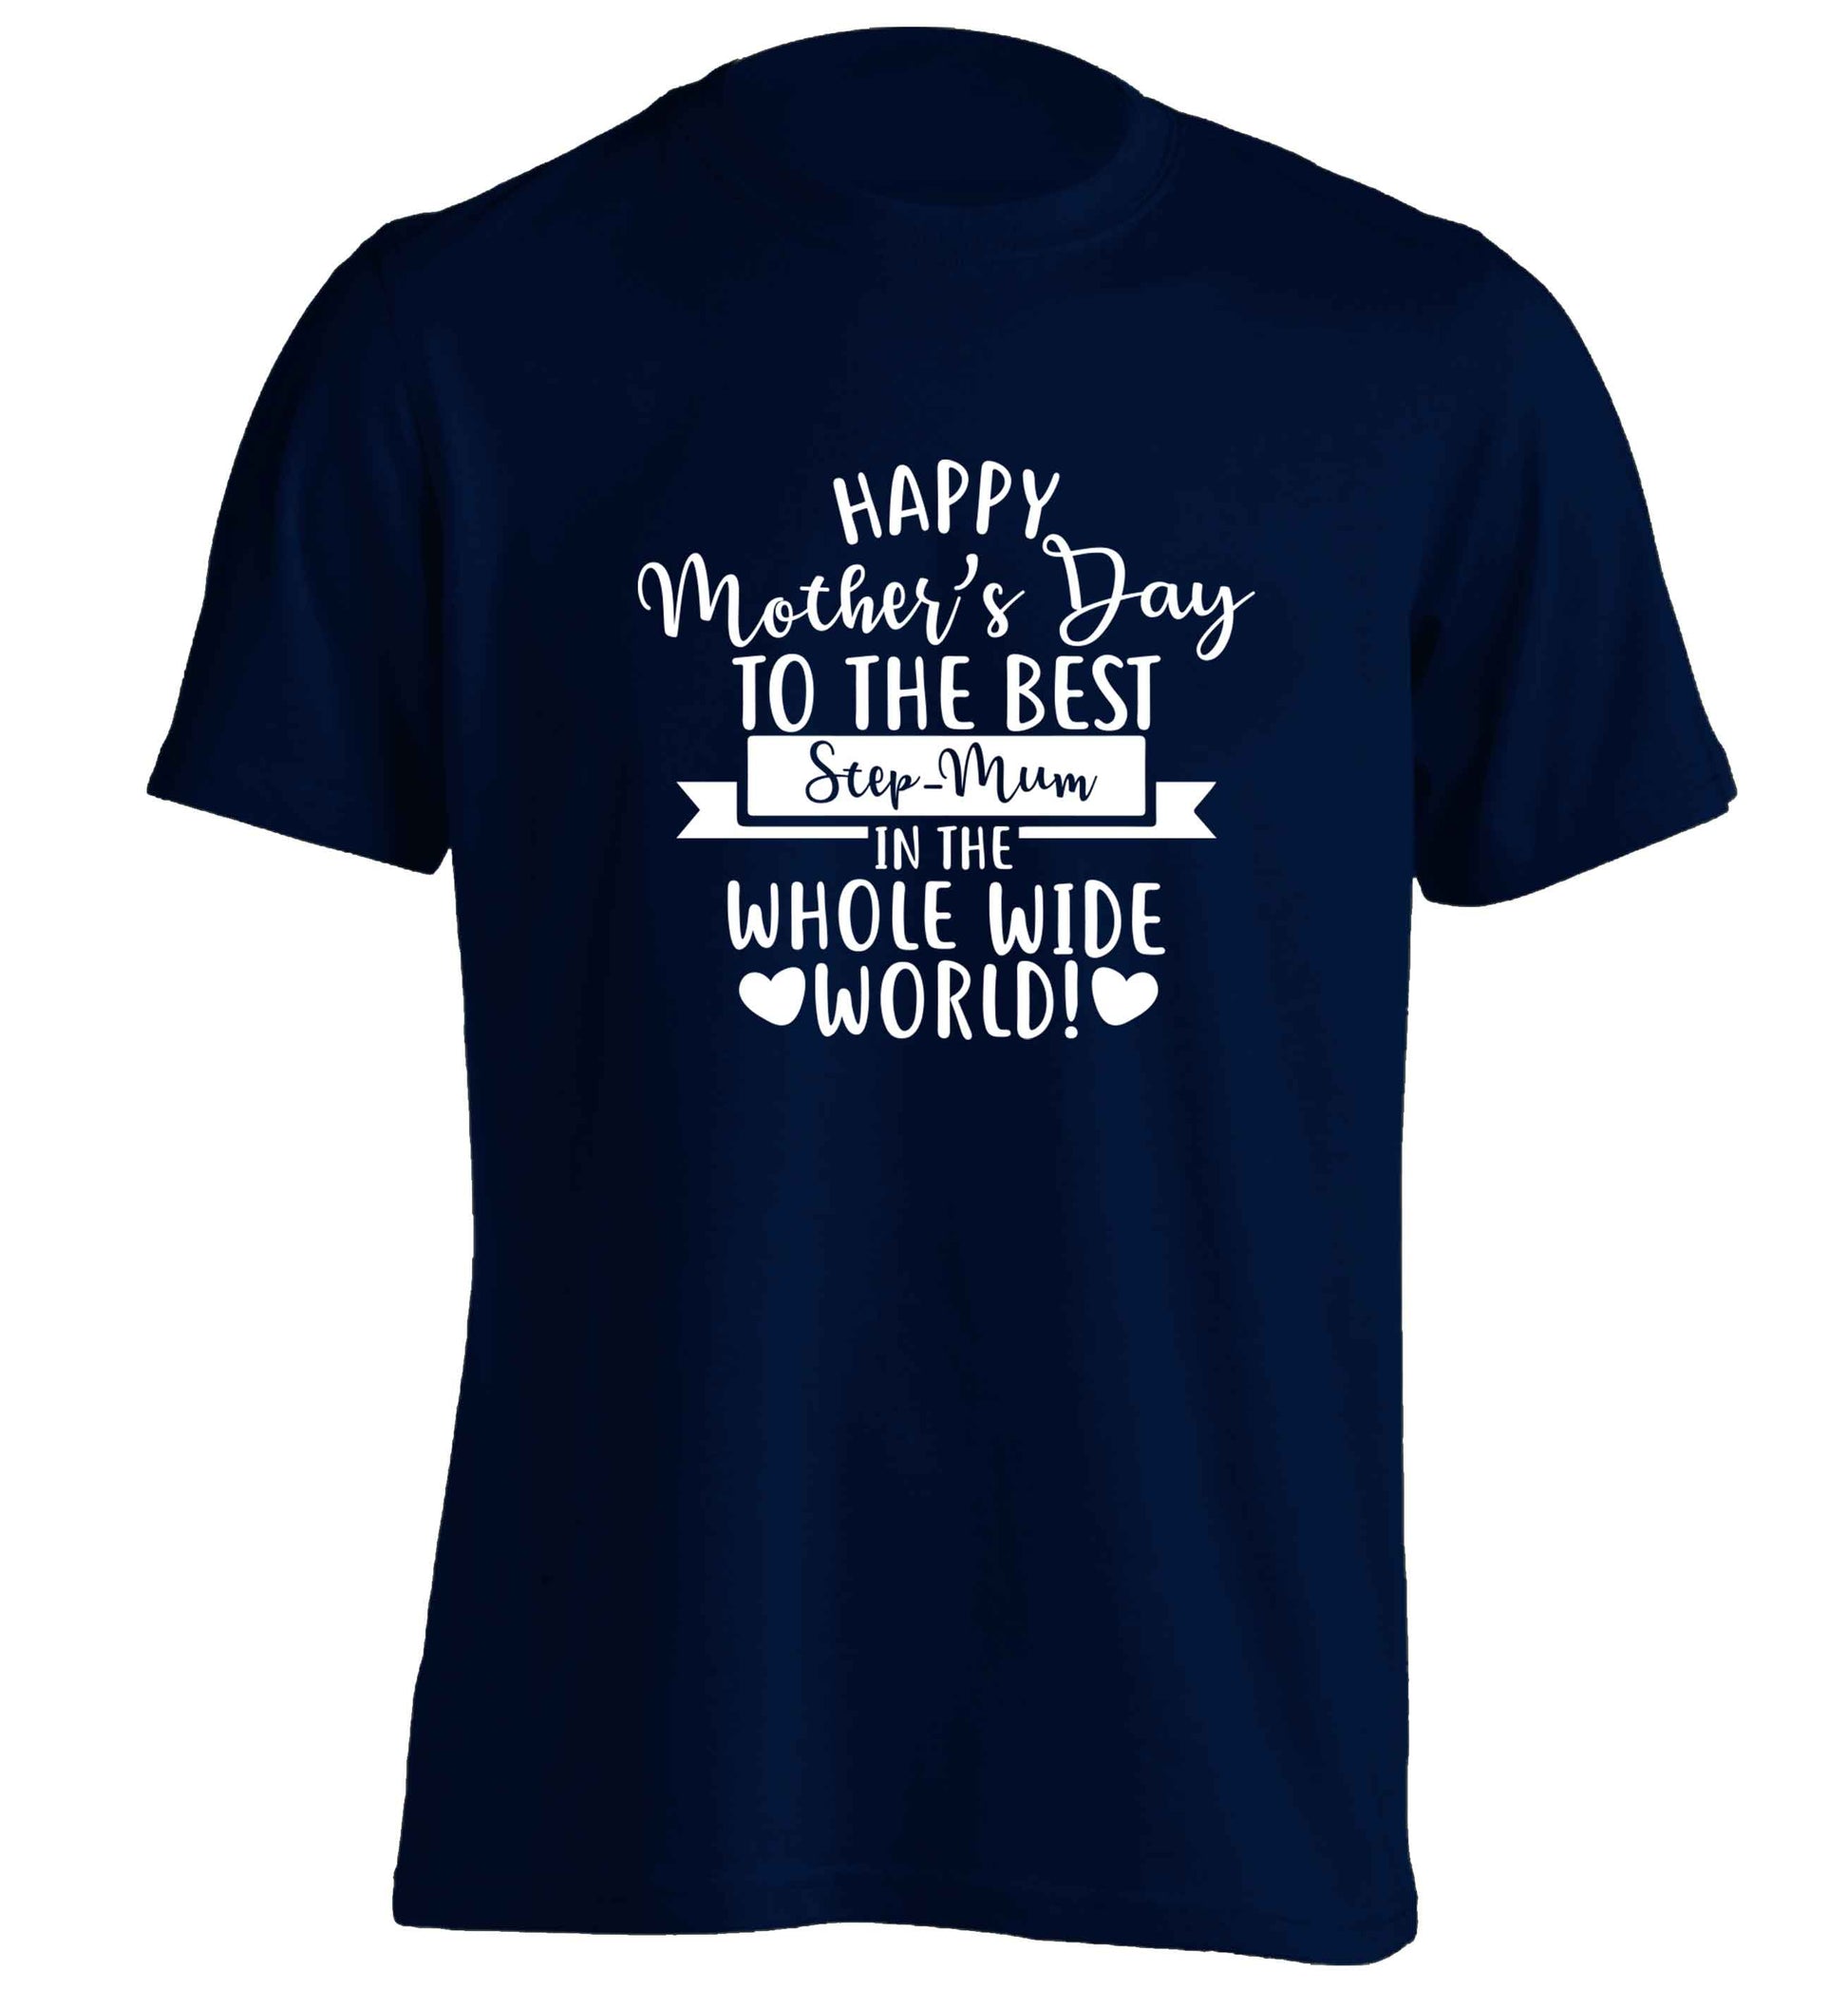 Happy mother's day to the best step-mum in the world adults unisex navy Tshirt 2XL